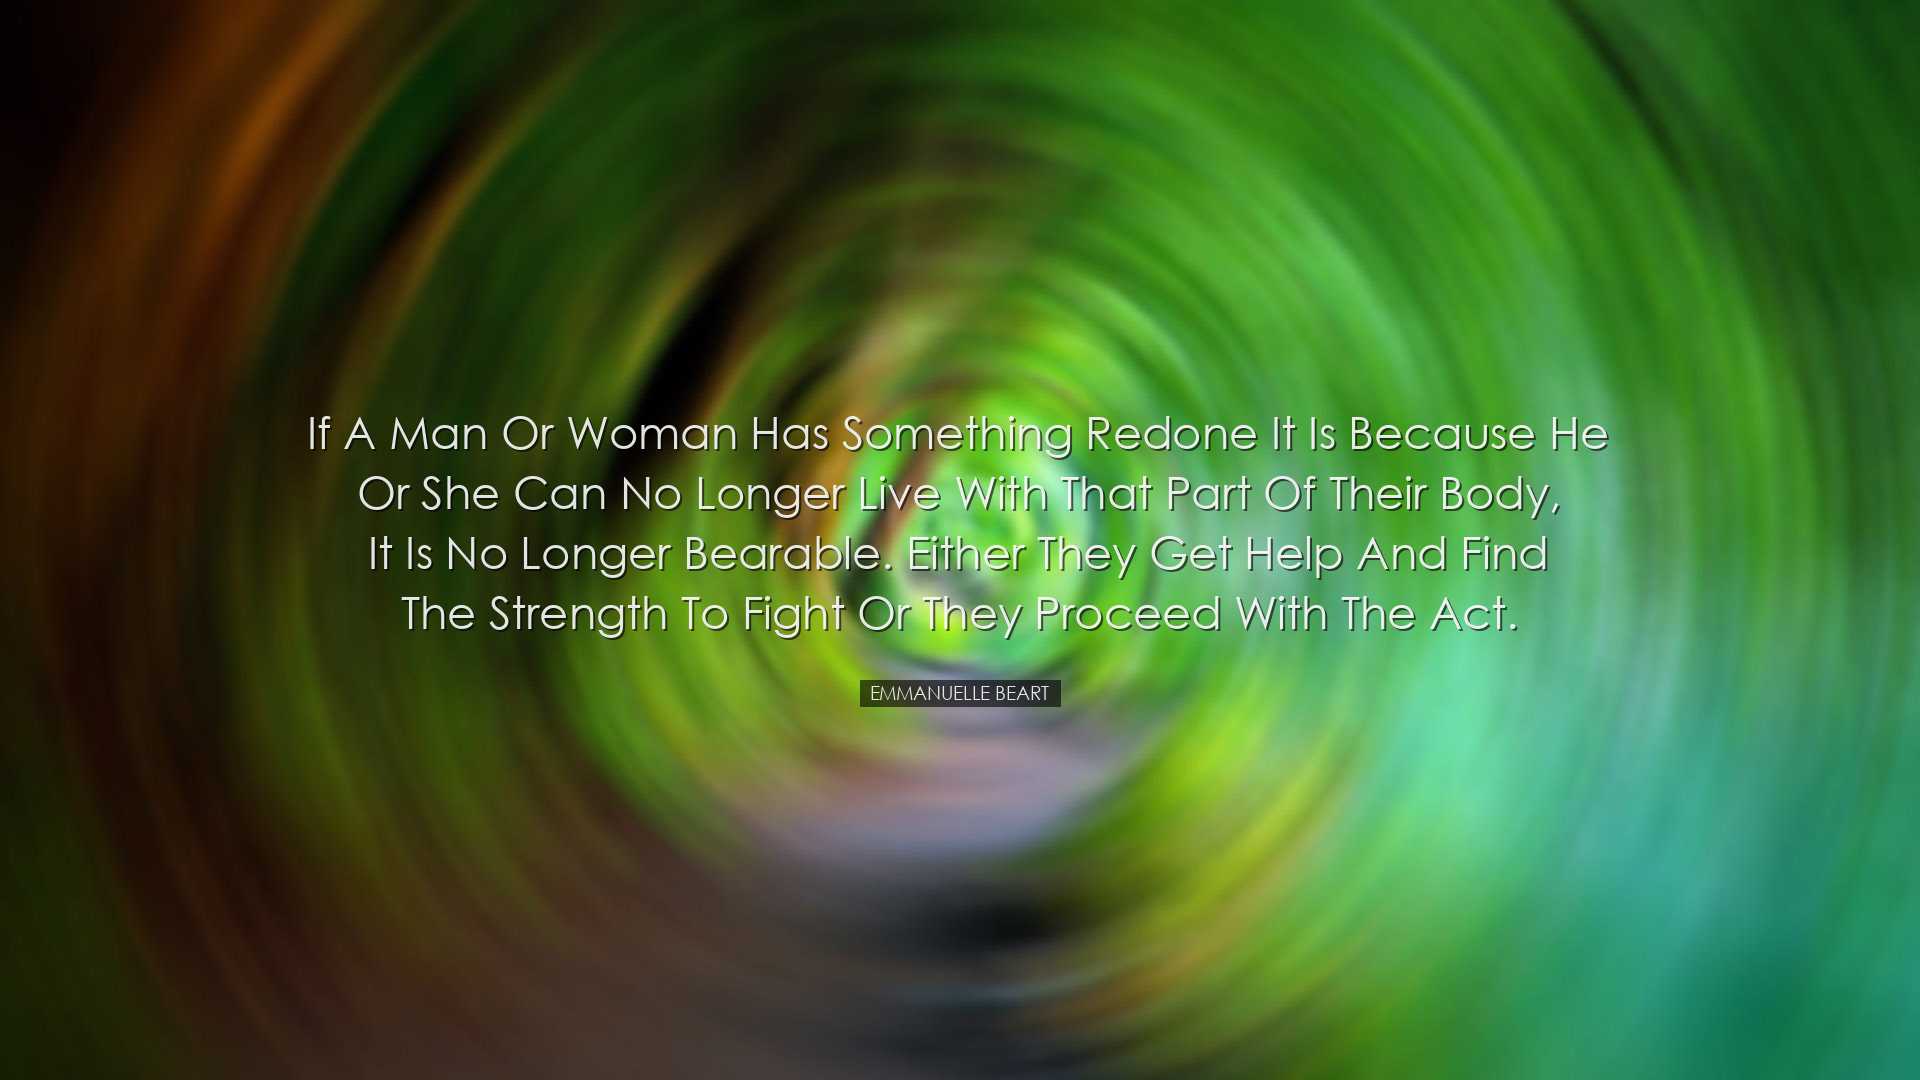 If a man or woman has something redone it is because he or she can